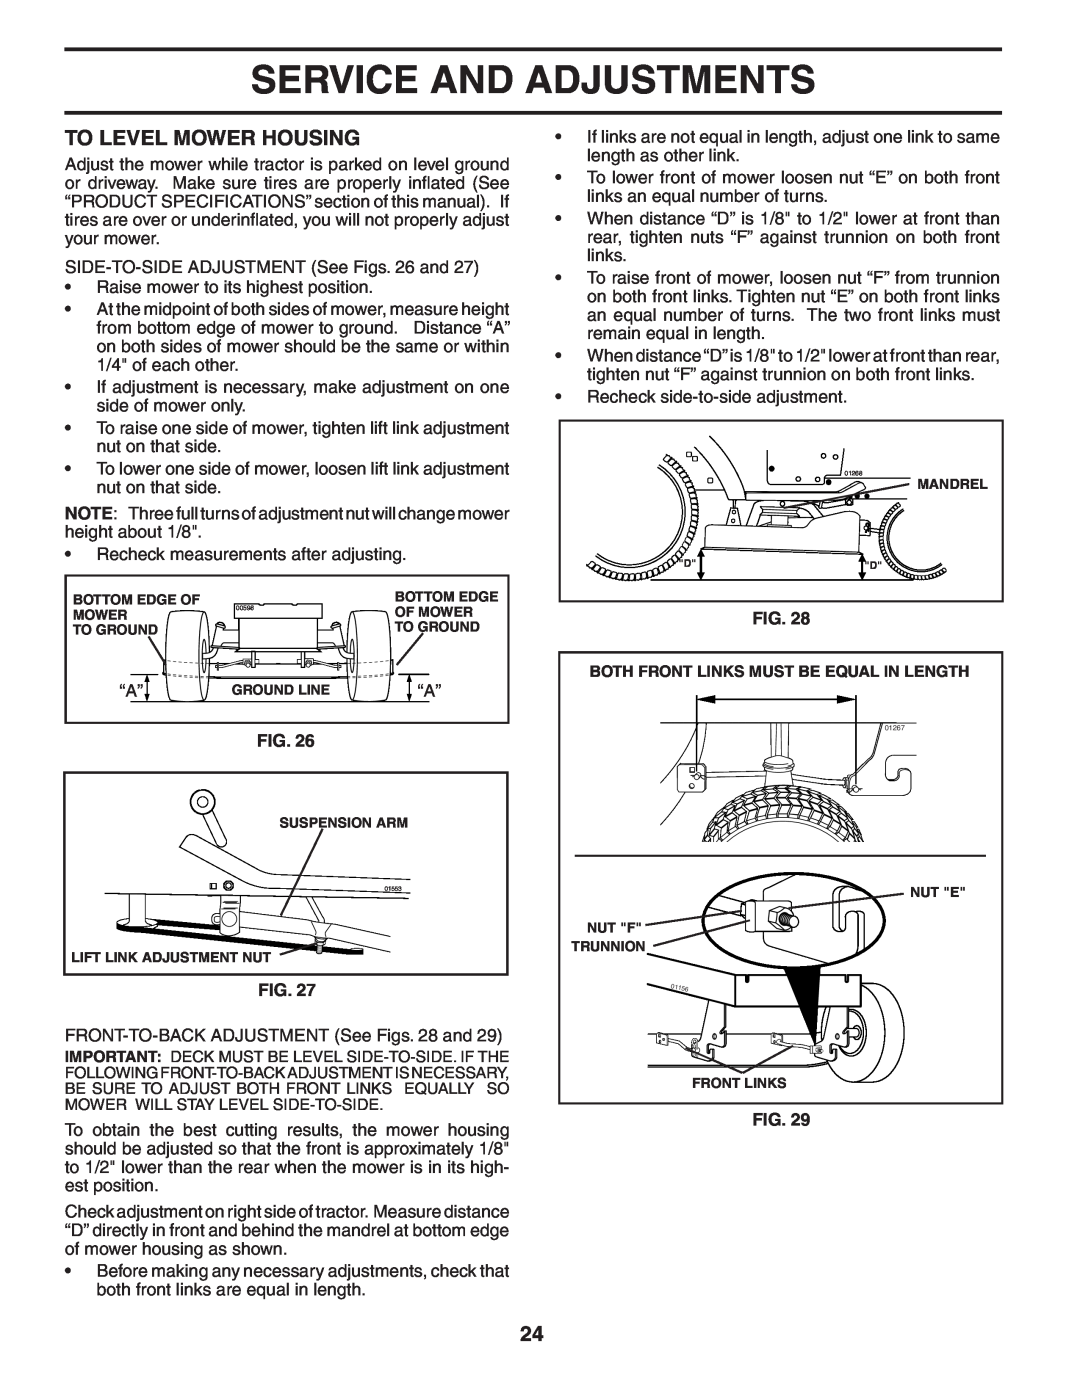 Husqvarna CTH2542 XP owner manual To Level Mower Housing, Service And Adjustments 